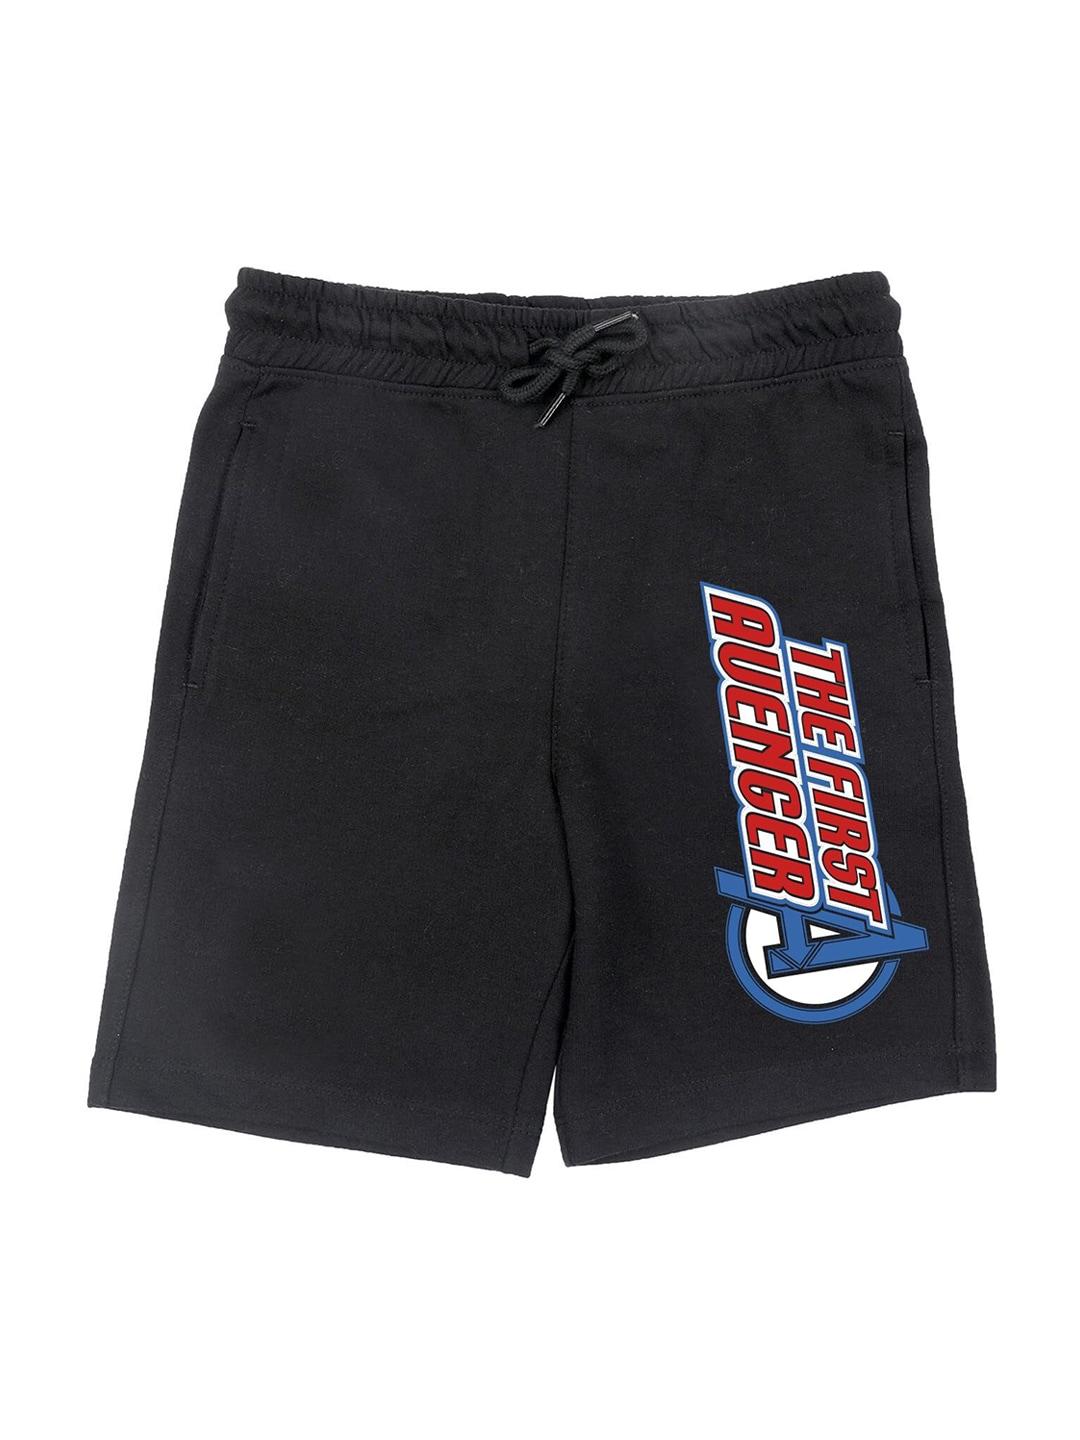 Marvel by Wear Your Mind Boys Black Avenger Graphic Print Shorts